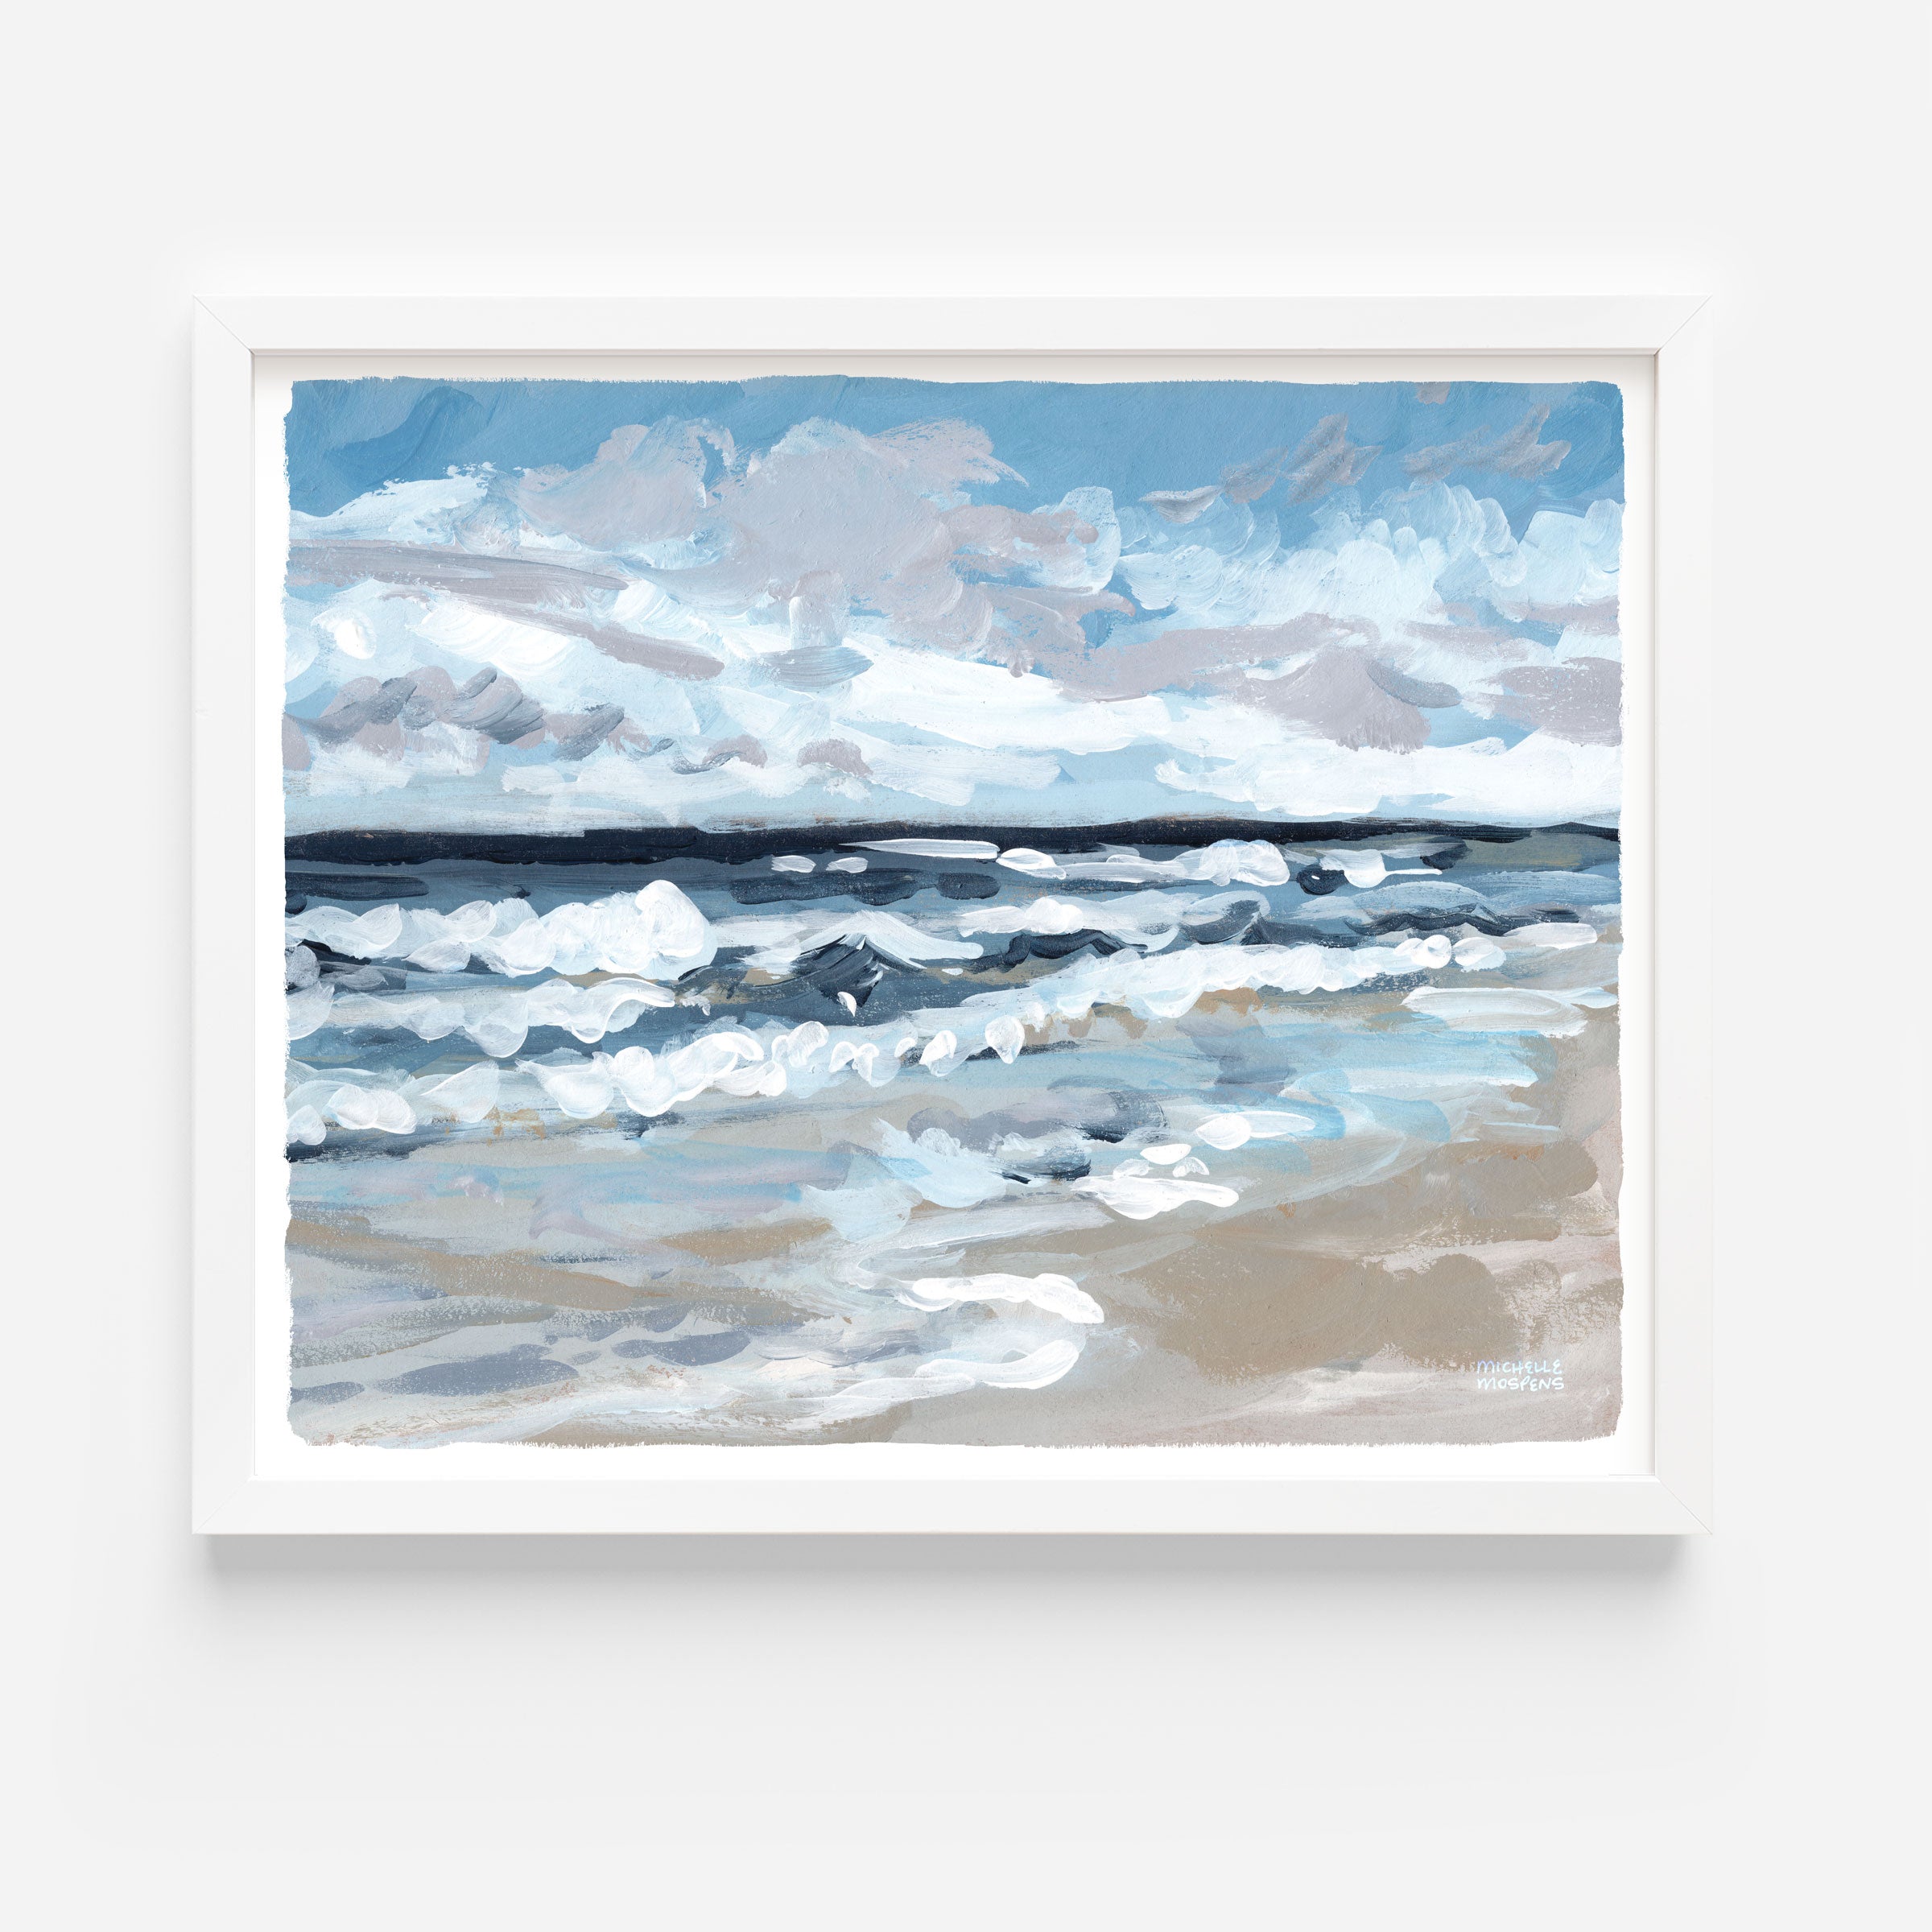 Tranquil Tides Beach Ocean Seascape Painting Wall Art Print by Michelle Mospens